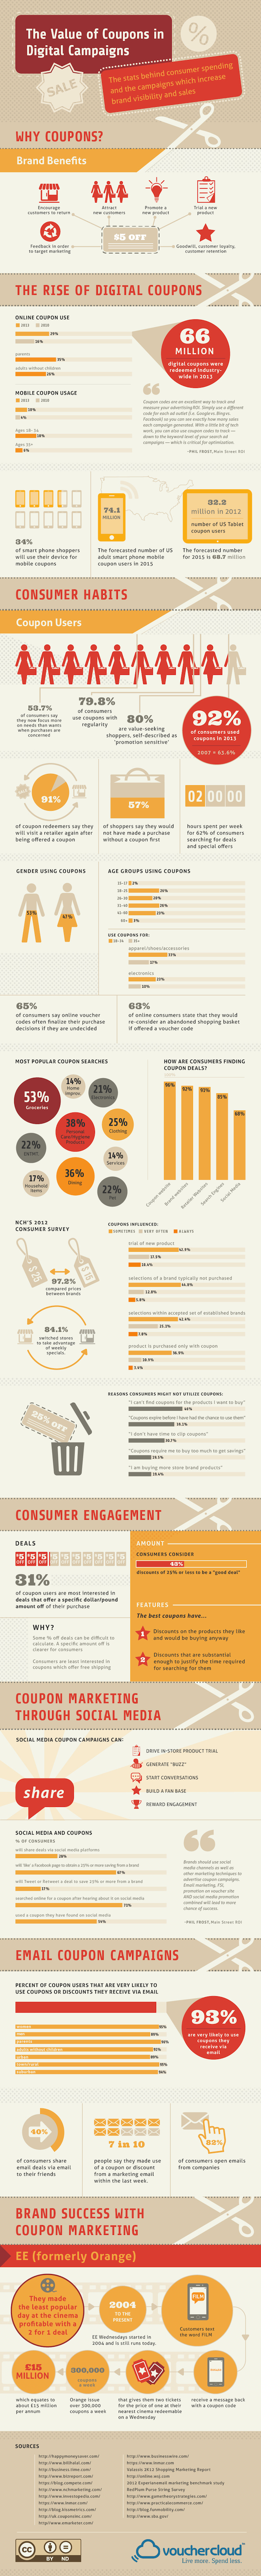 value-of-coupons-in-digital-marketing-infographic